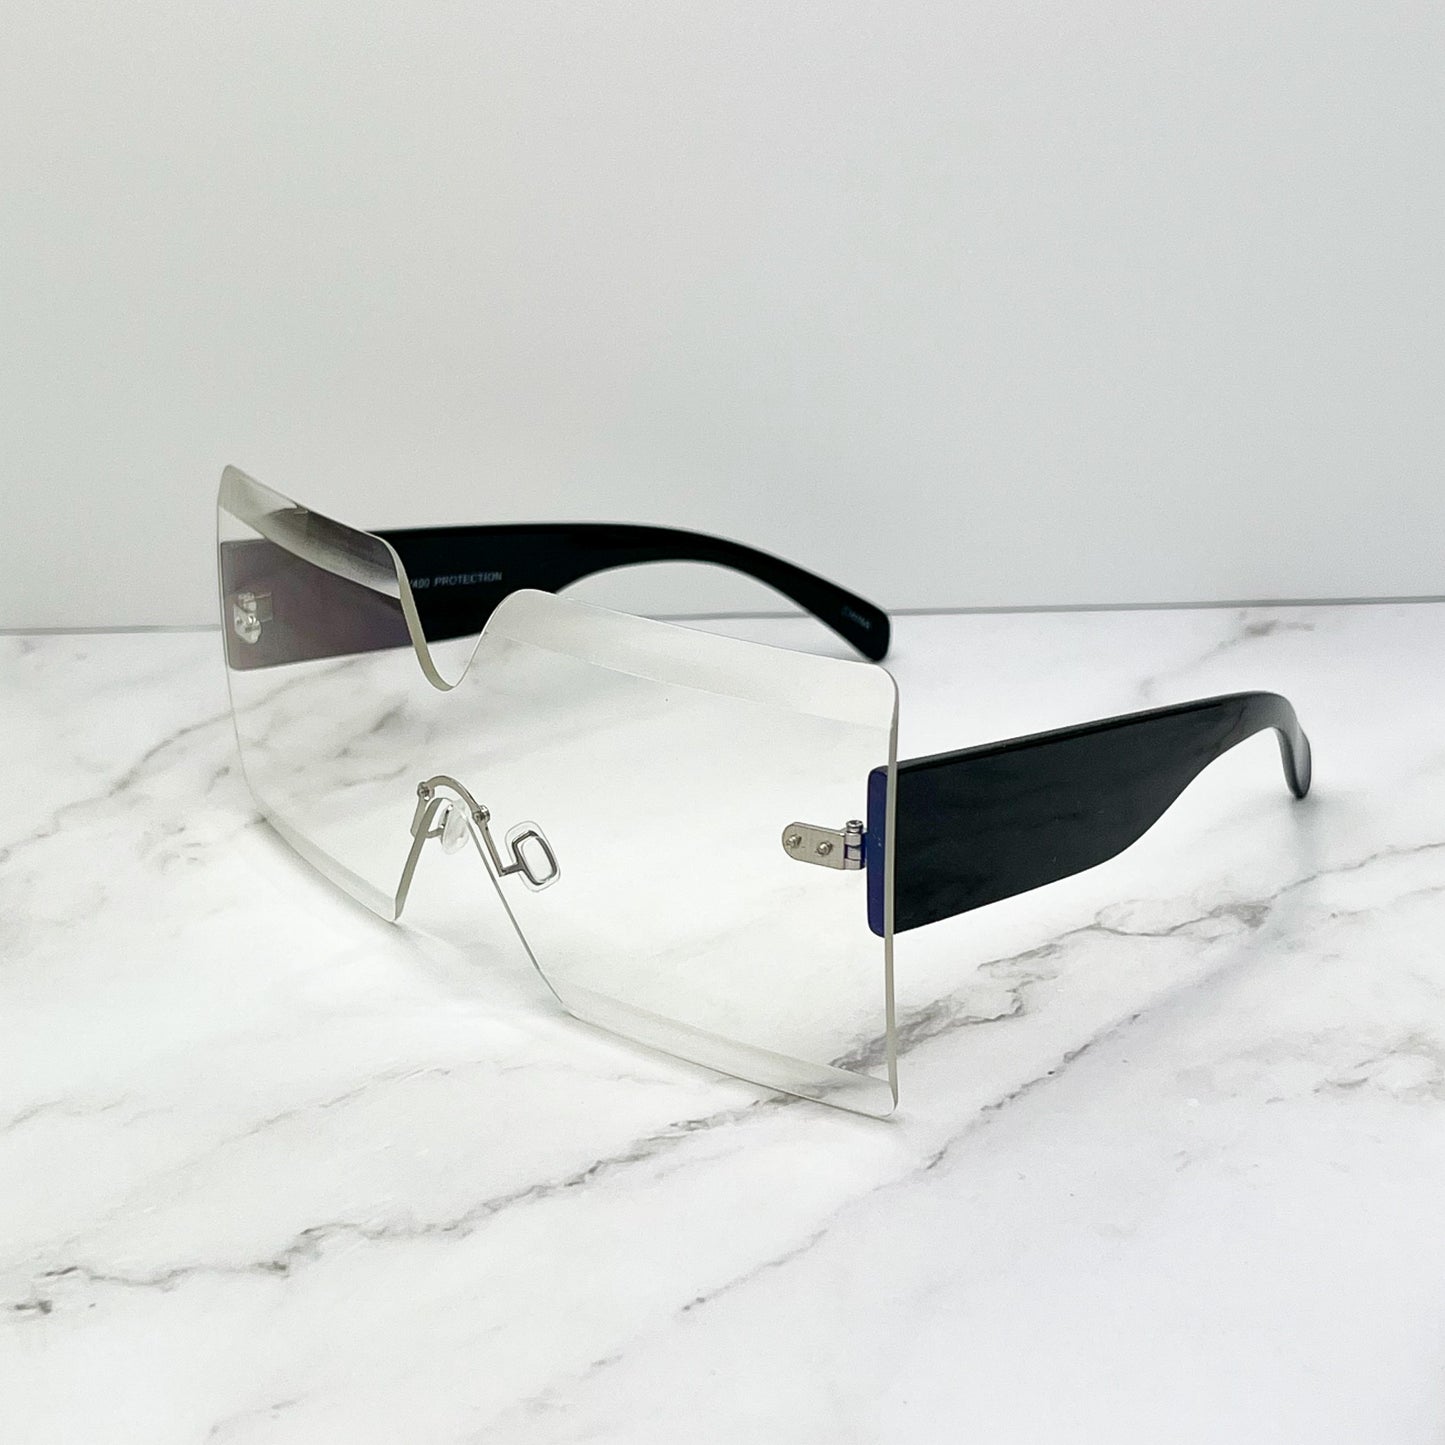 Clear Vision sunglasses